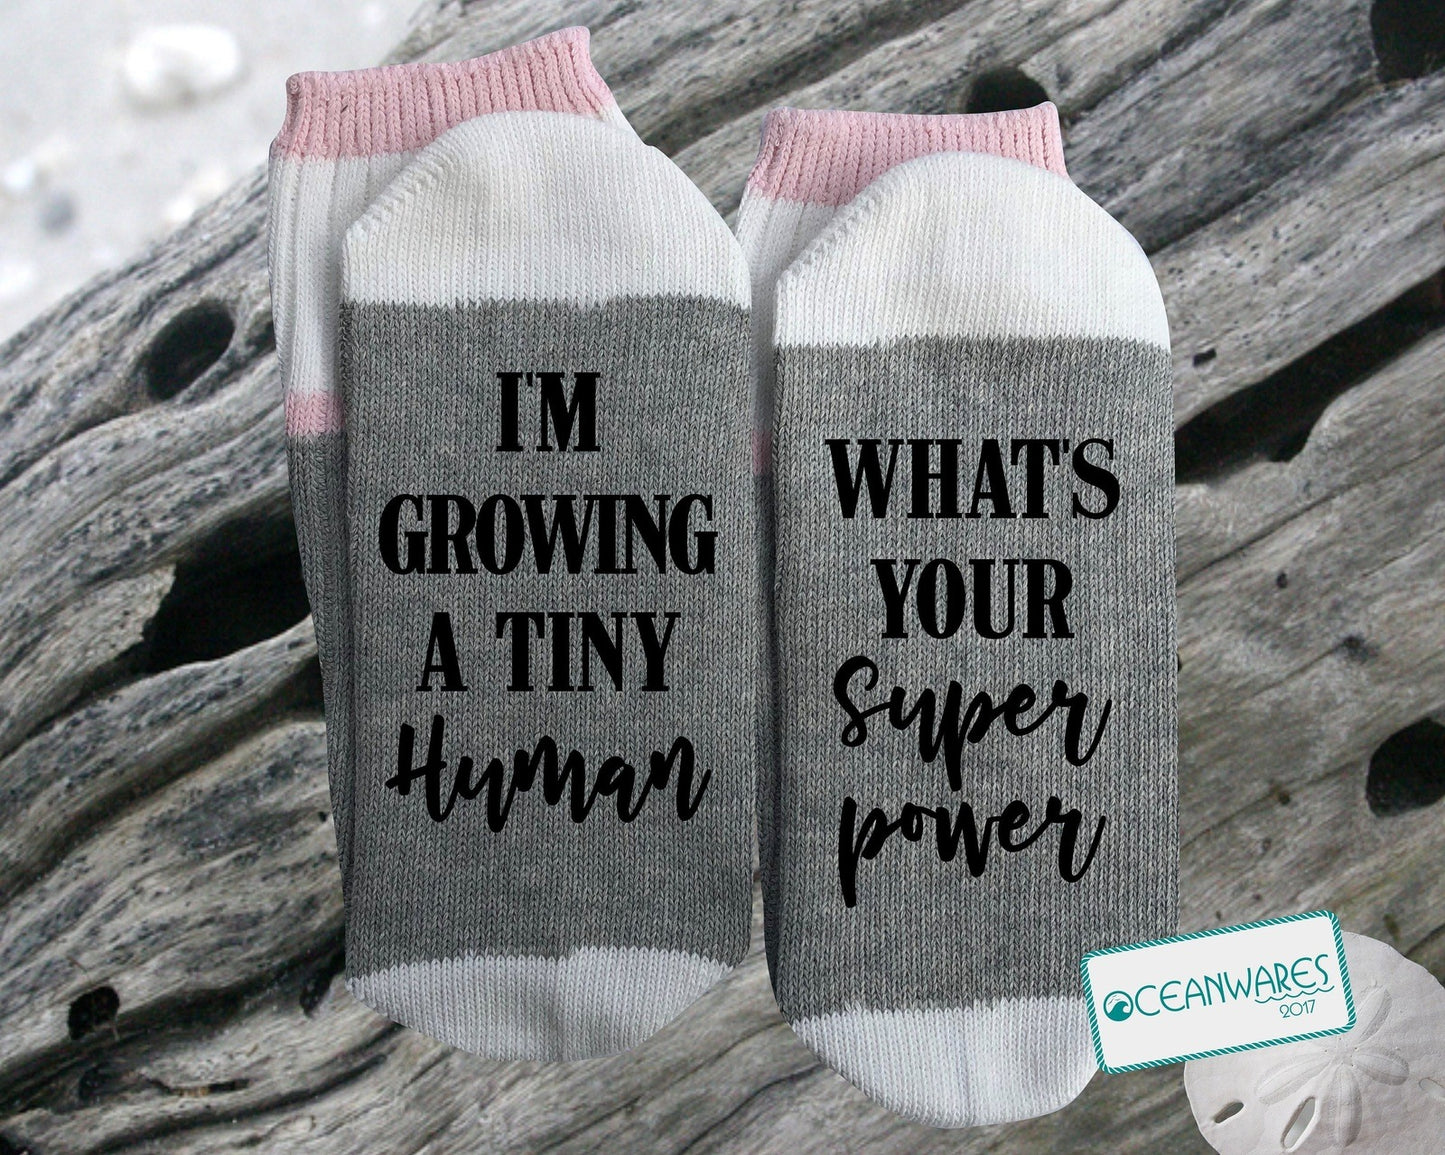 I'm Growing a Tiny Human, What's your Super Power, SUPER SOFT NOVELTY WORD SOCKS.